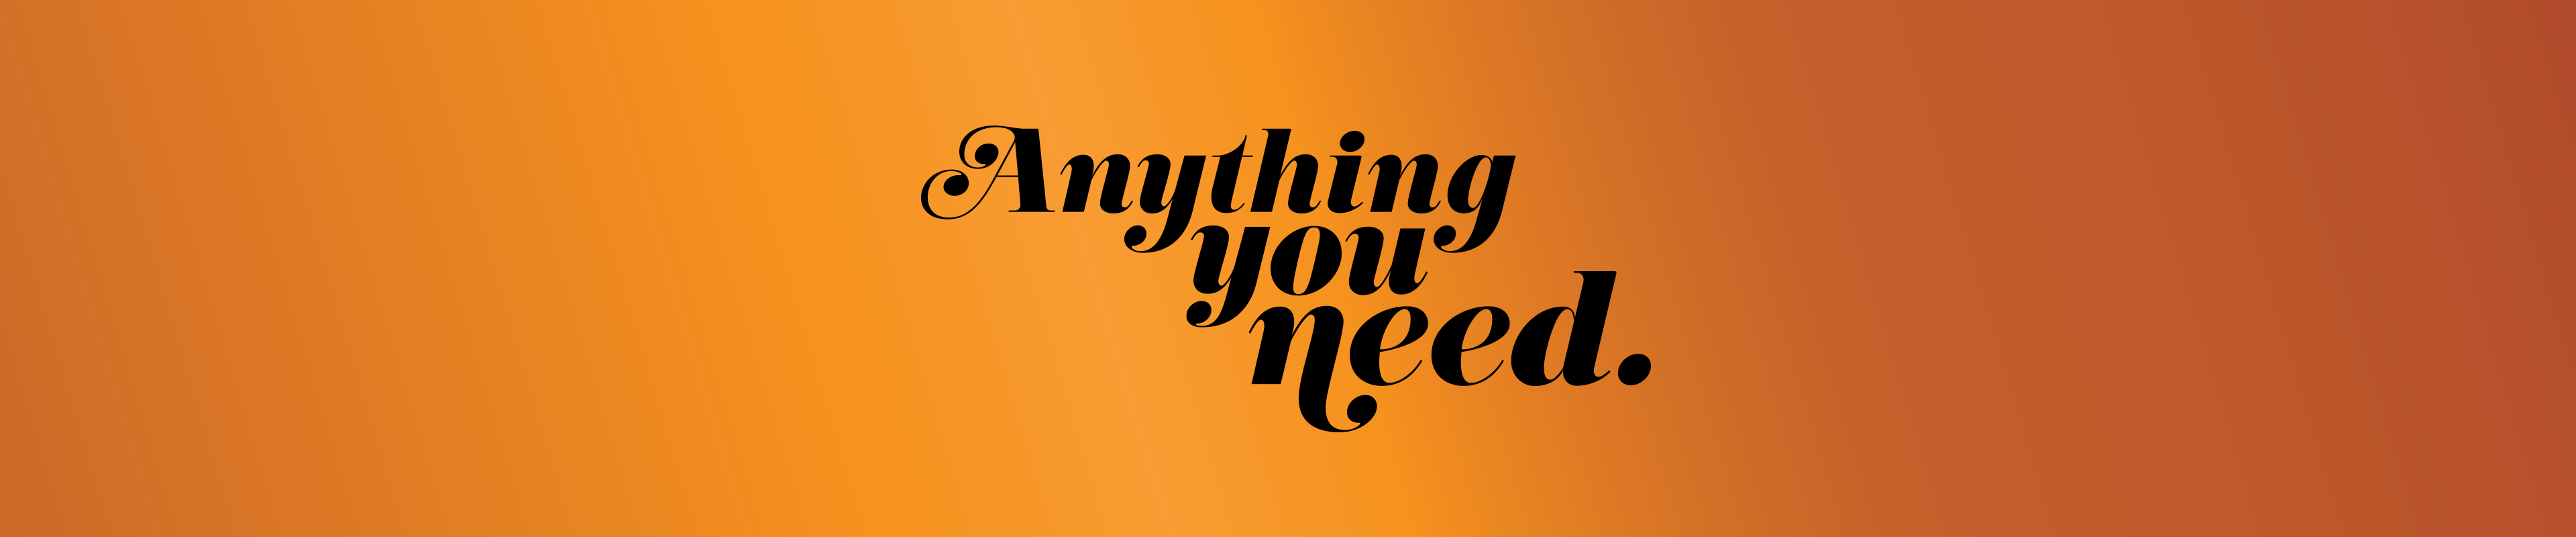 Typography for Anything You Need